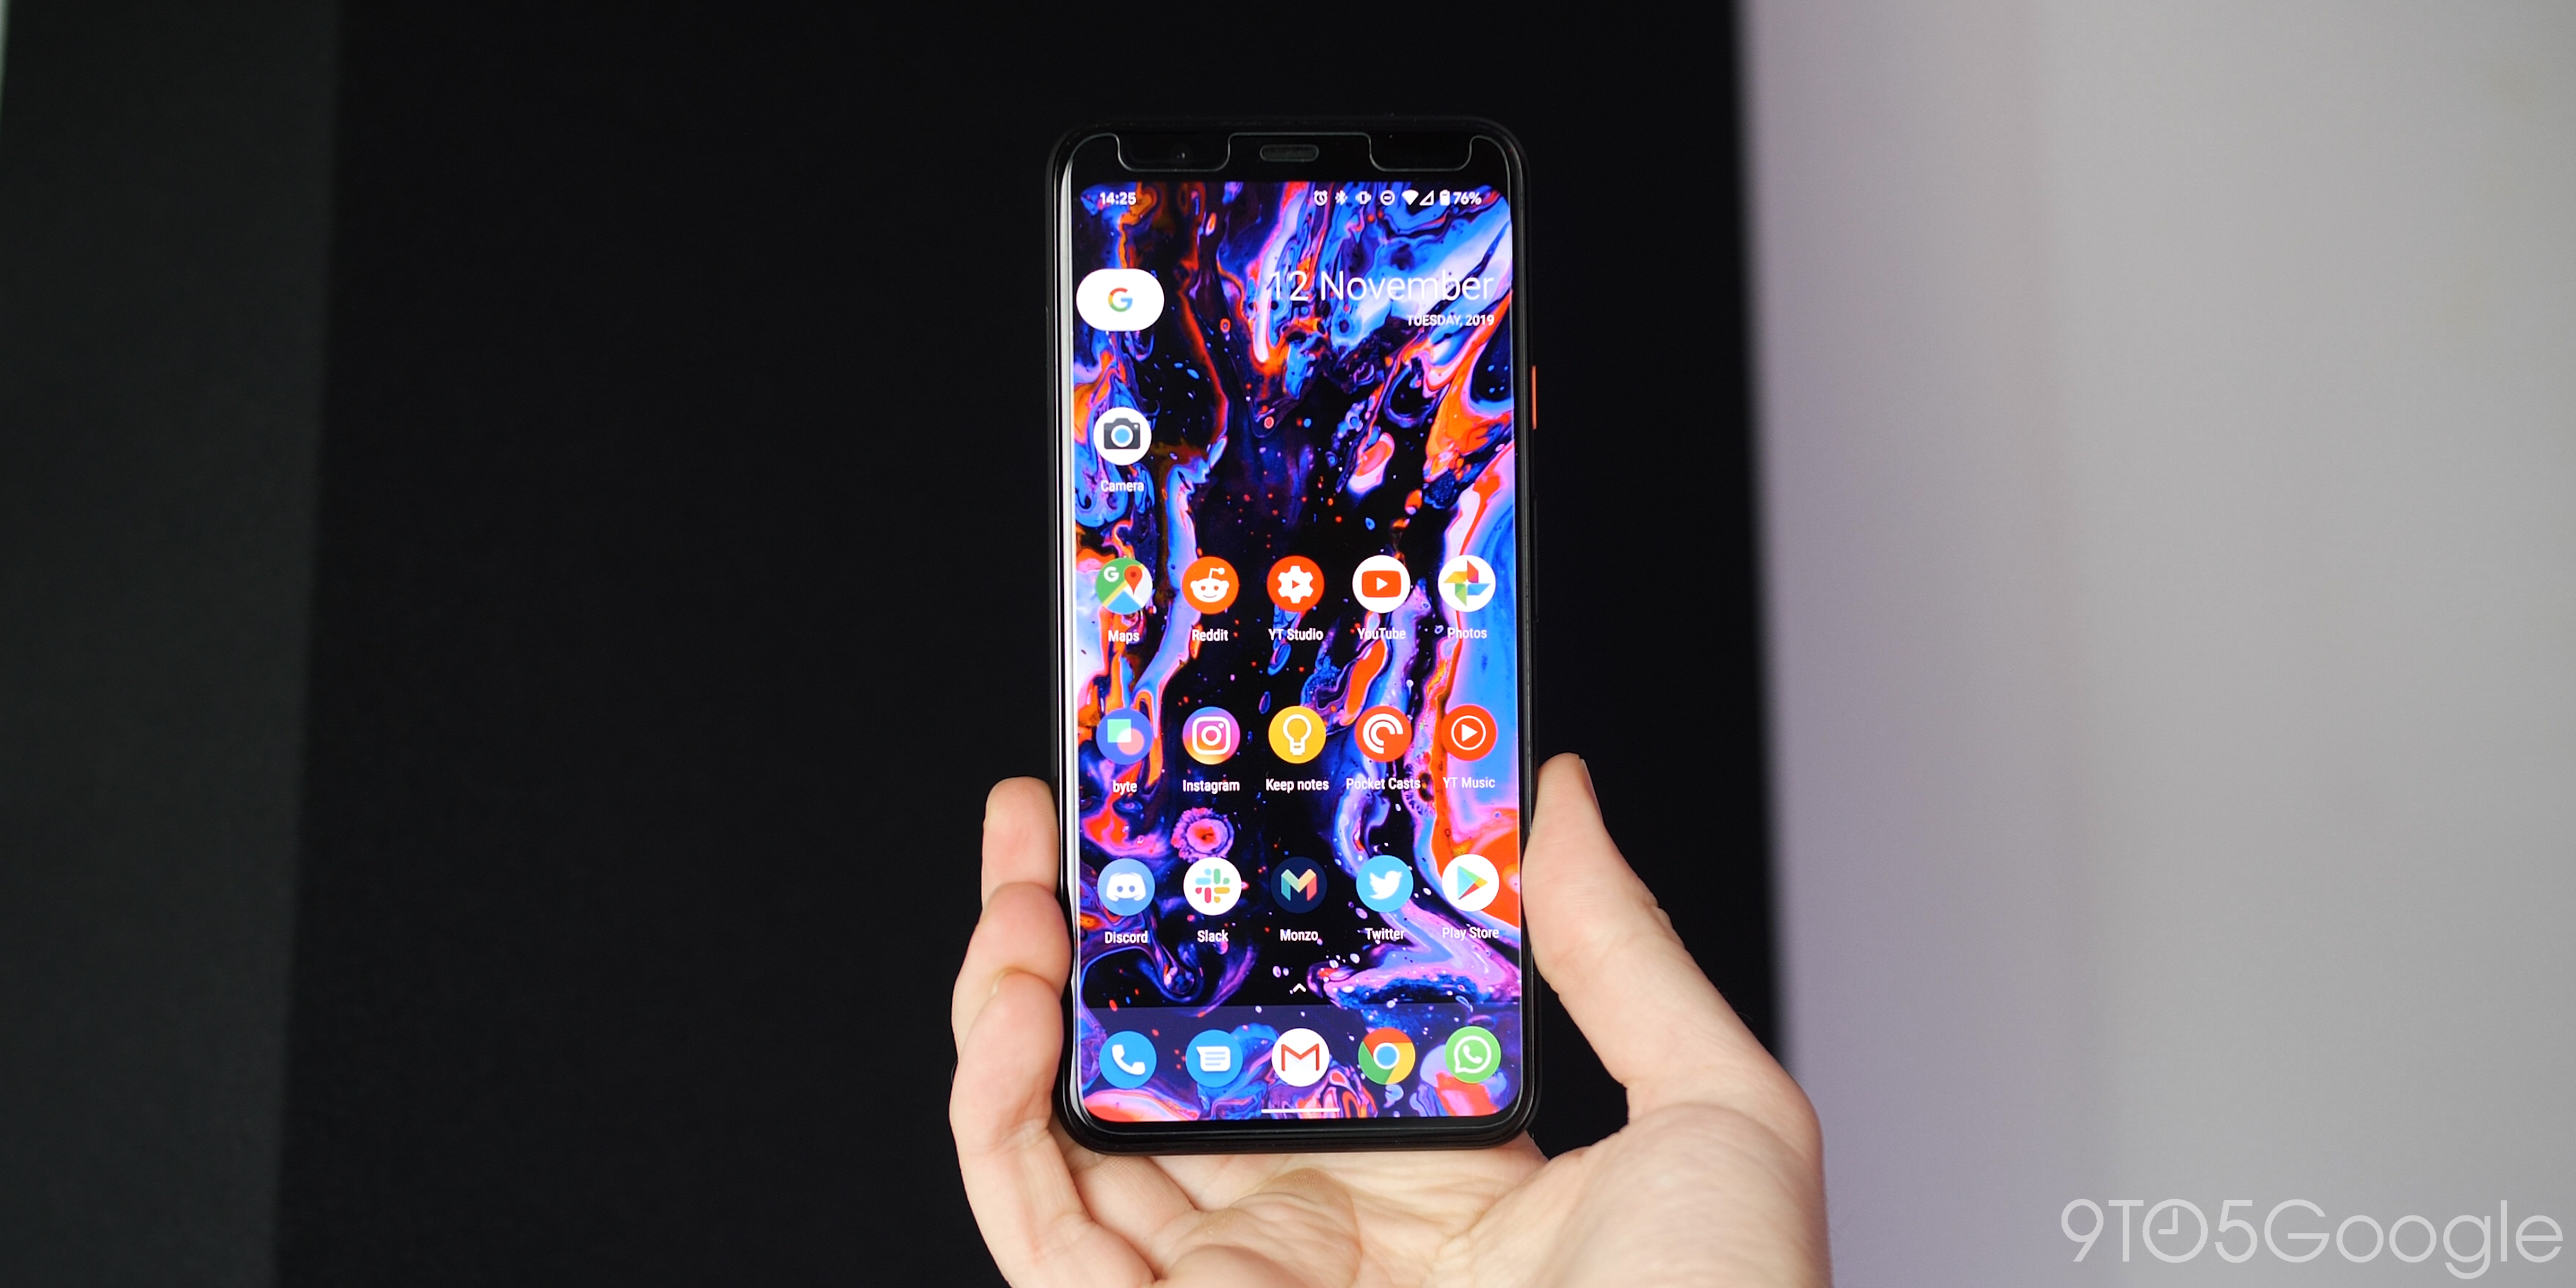 Pixel 4 tips and tricks: How to use the essentials [Video ... - 